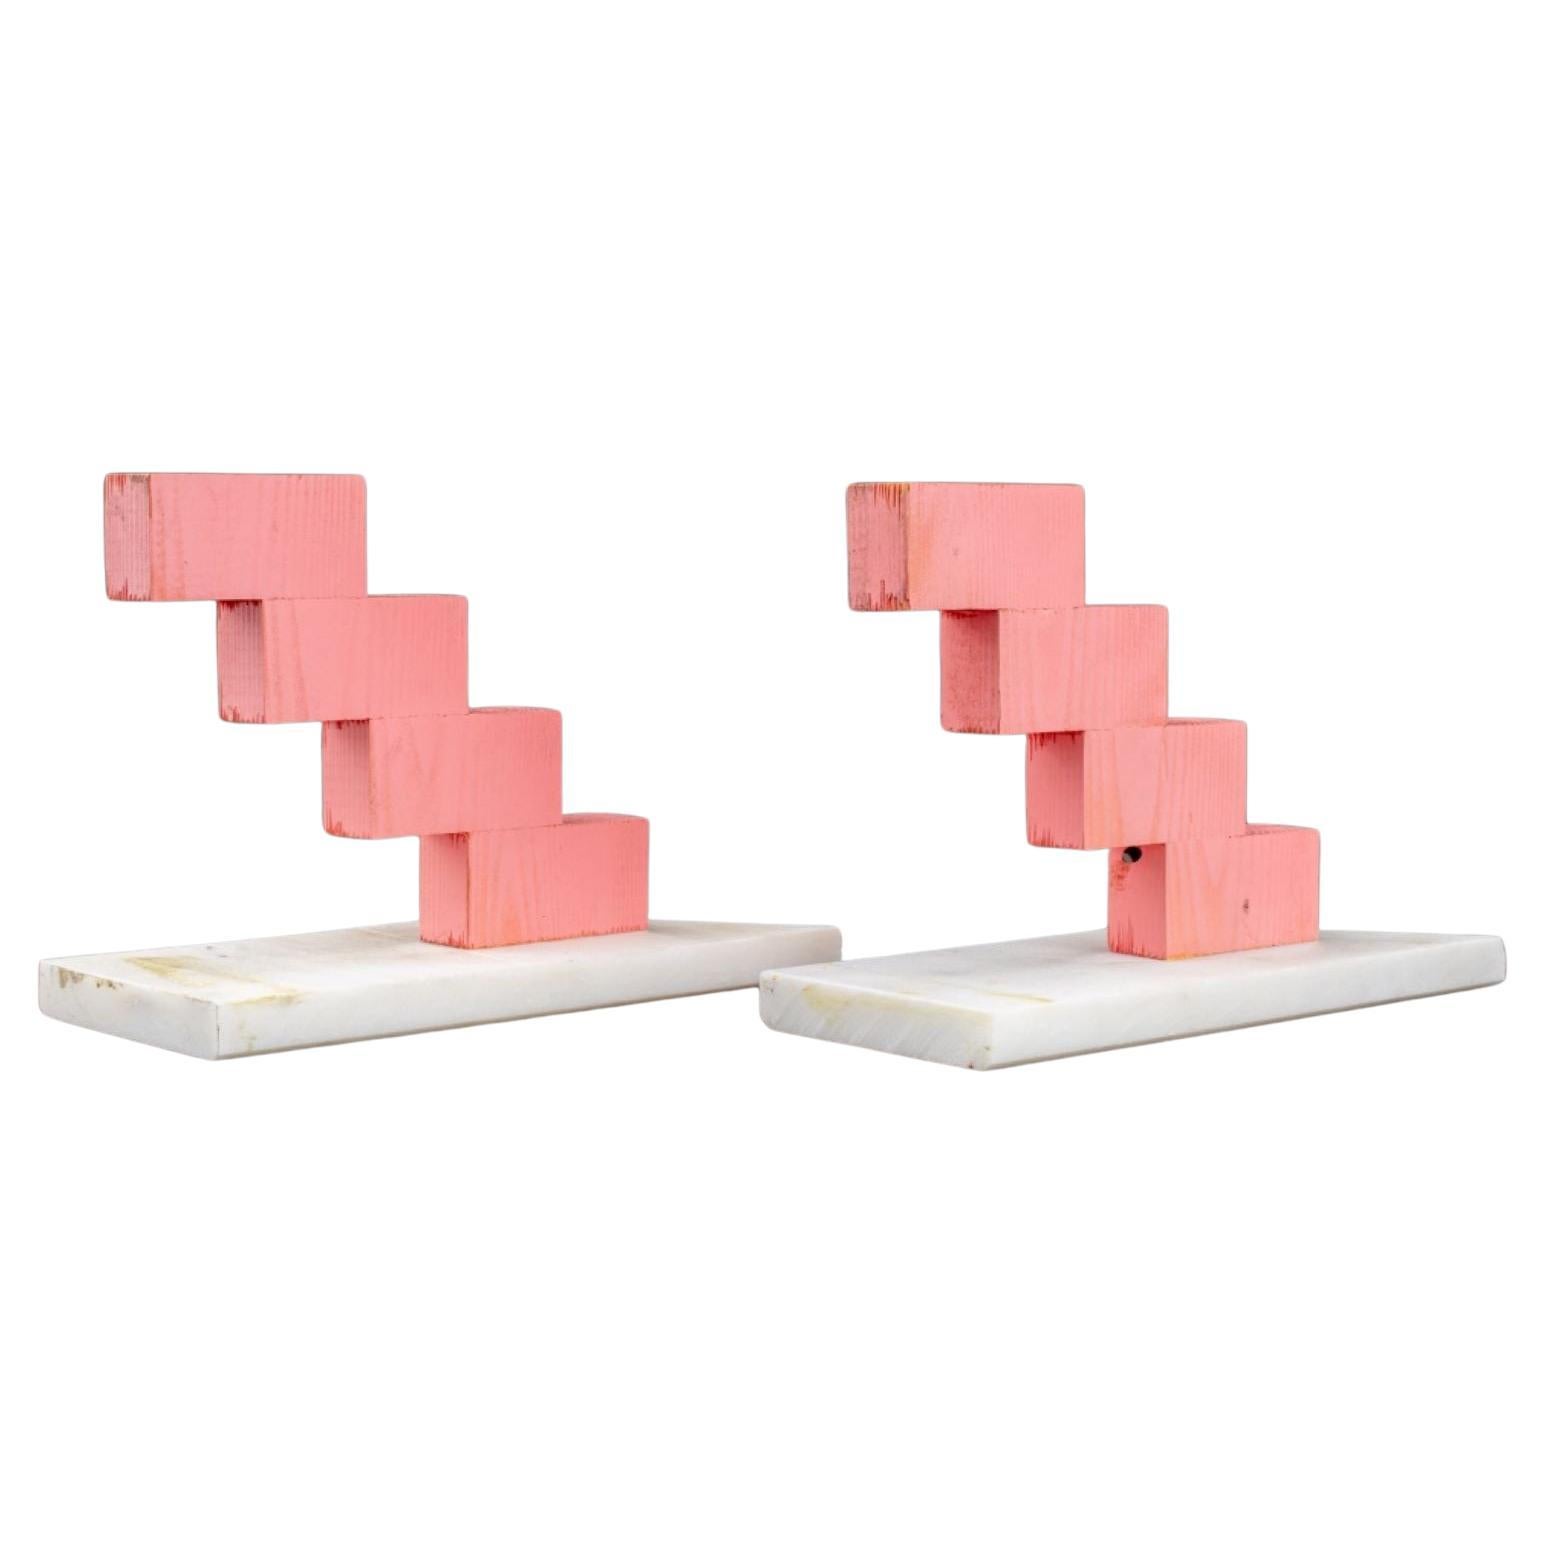 Pair of Painted Wood Zig-Zag Bookends, Mid 20th C